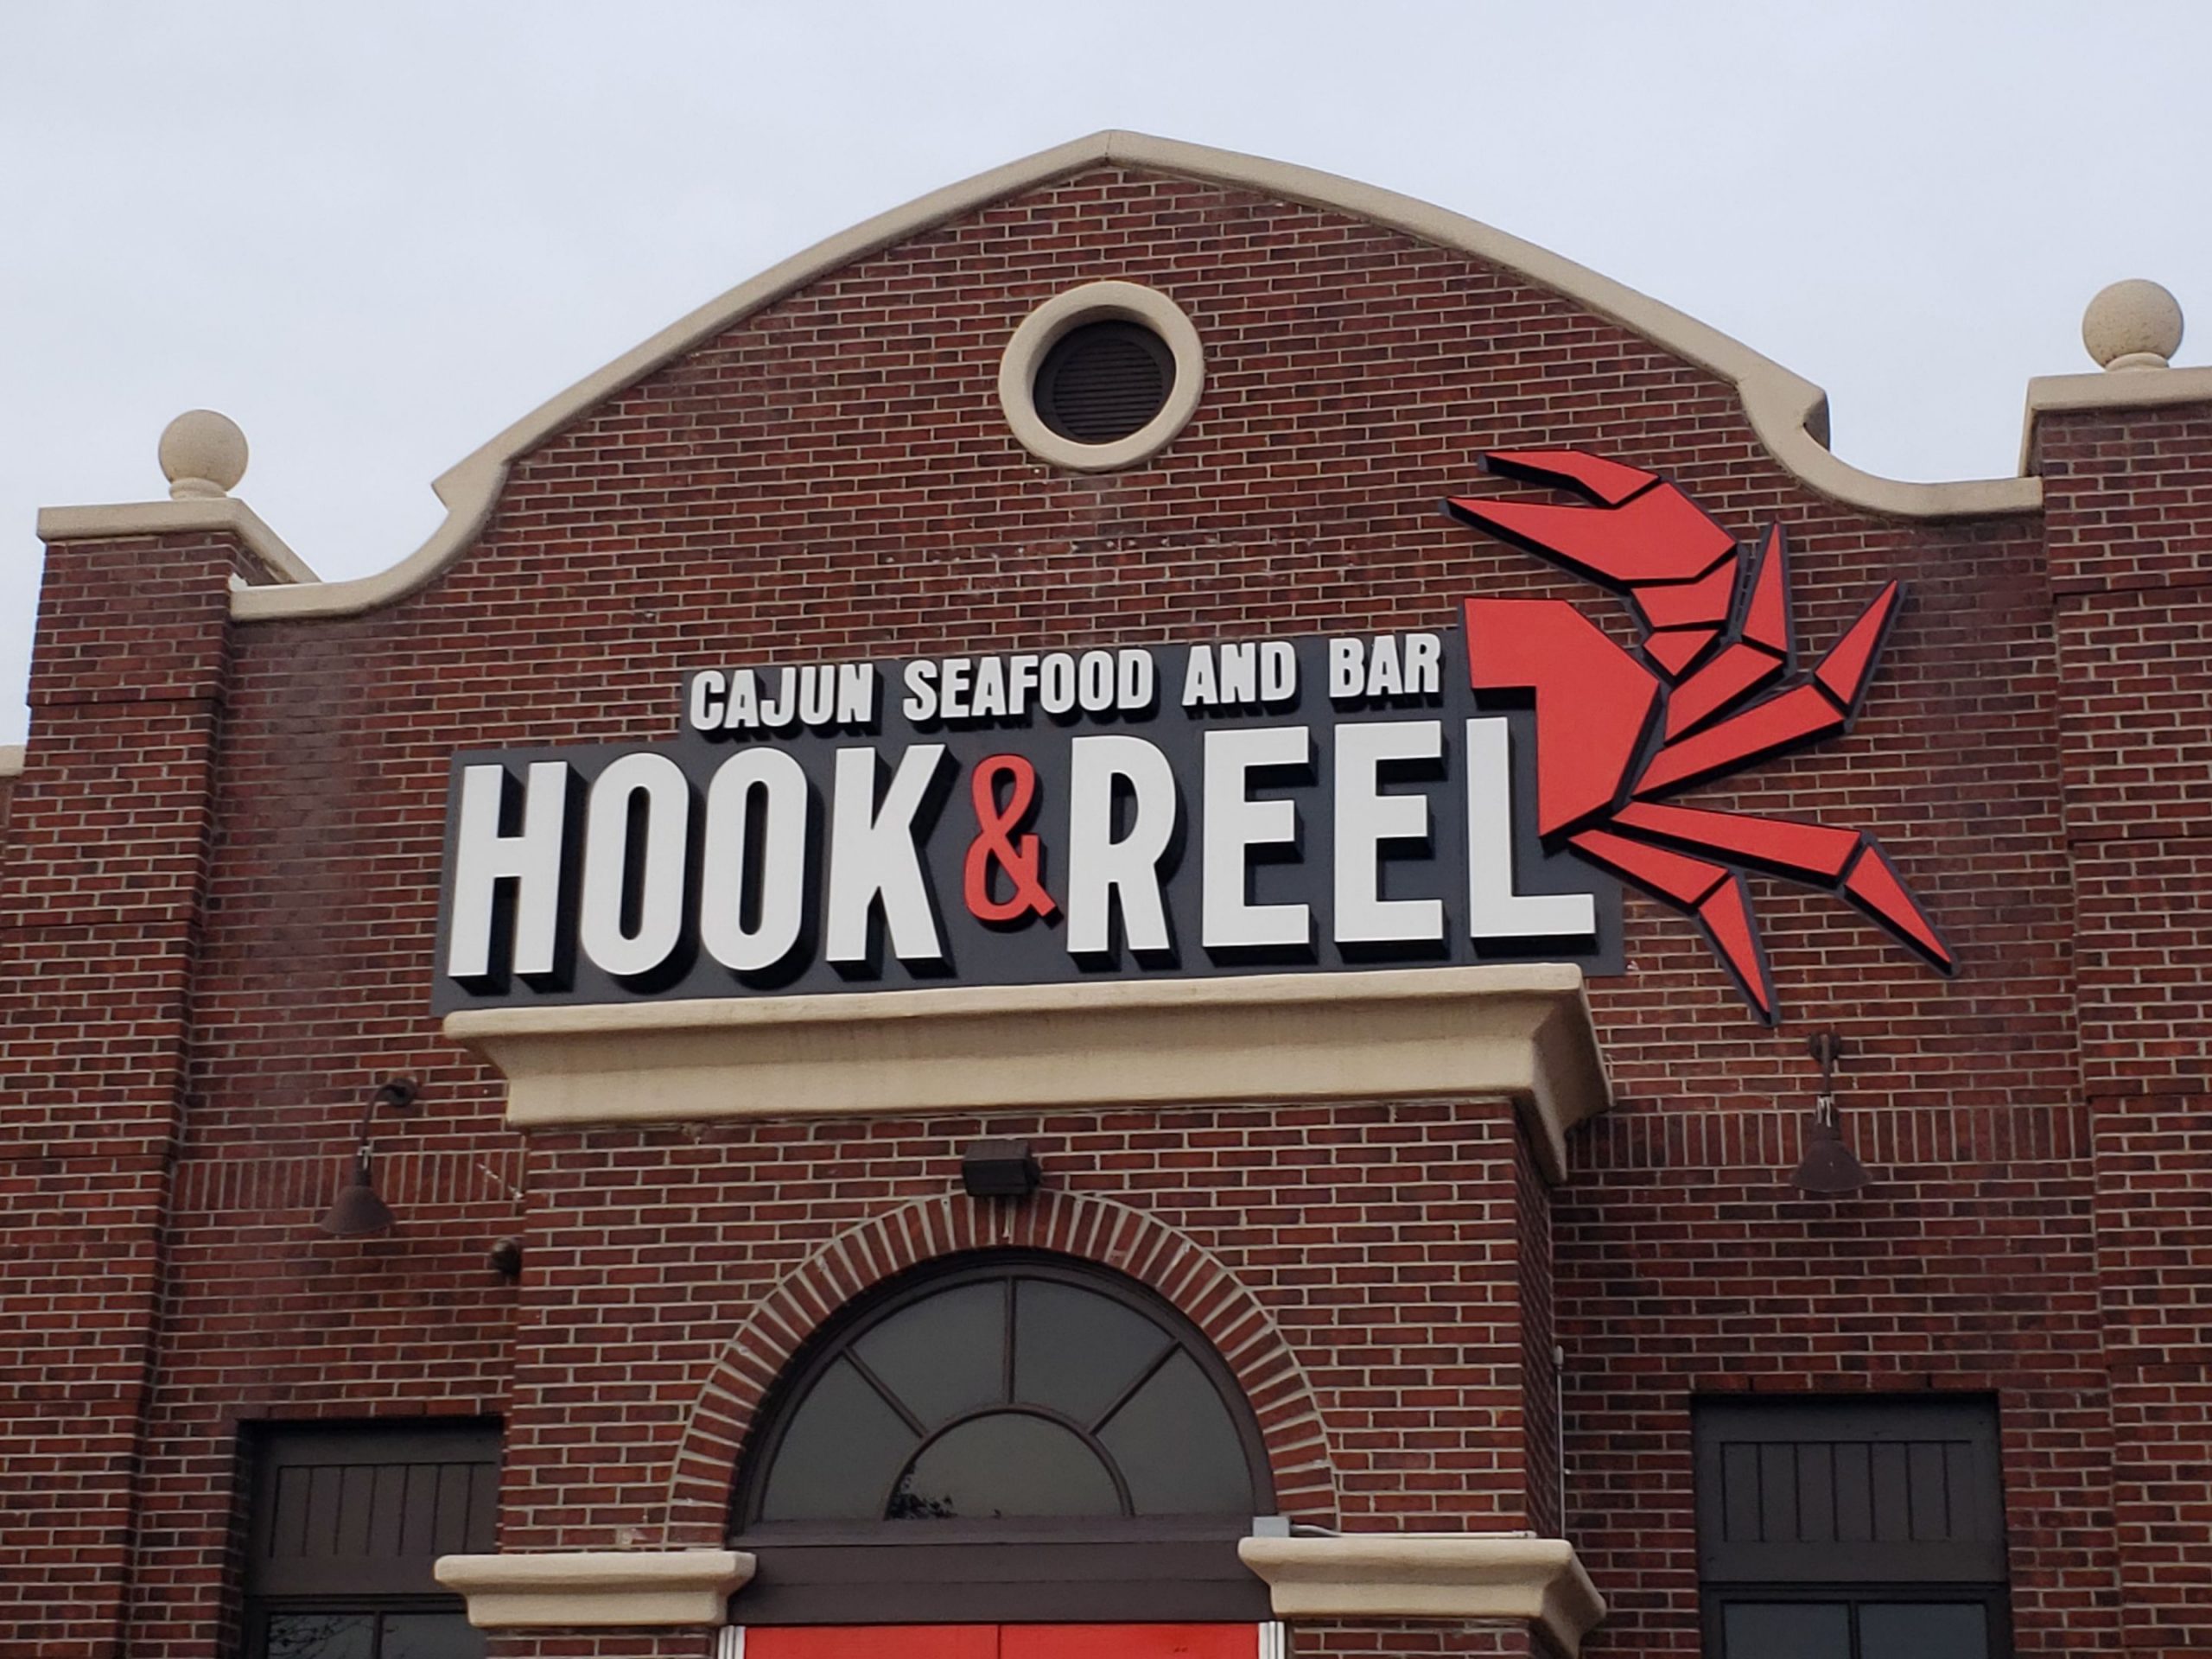 hook and reel seafood restaurant channel letter and logo installed on brick building